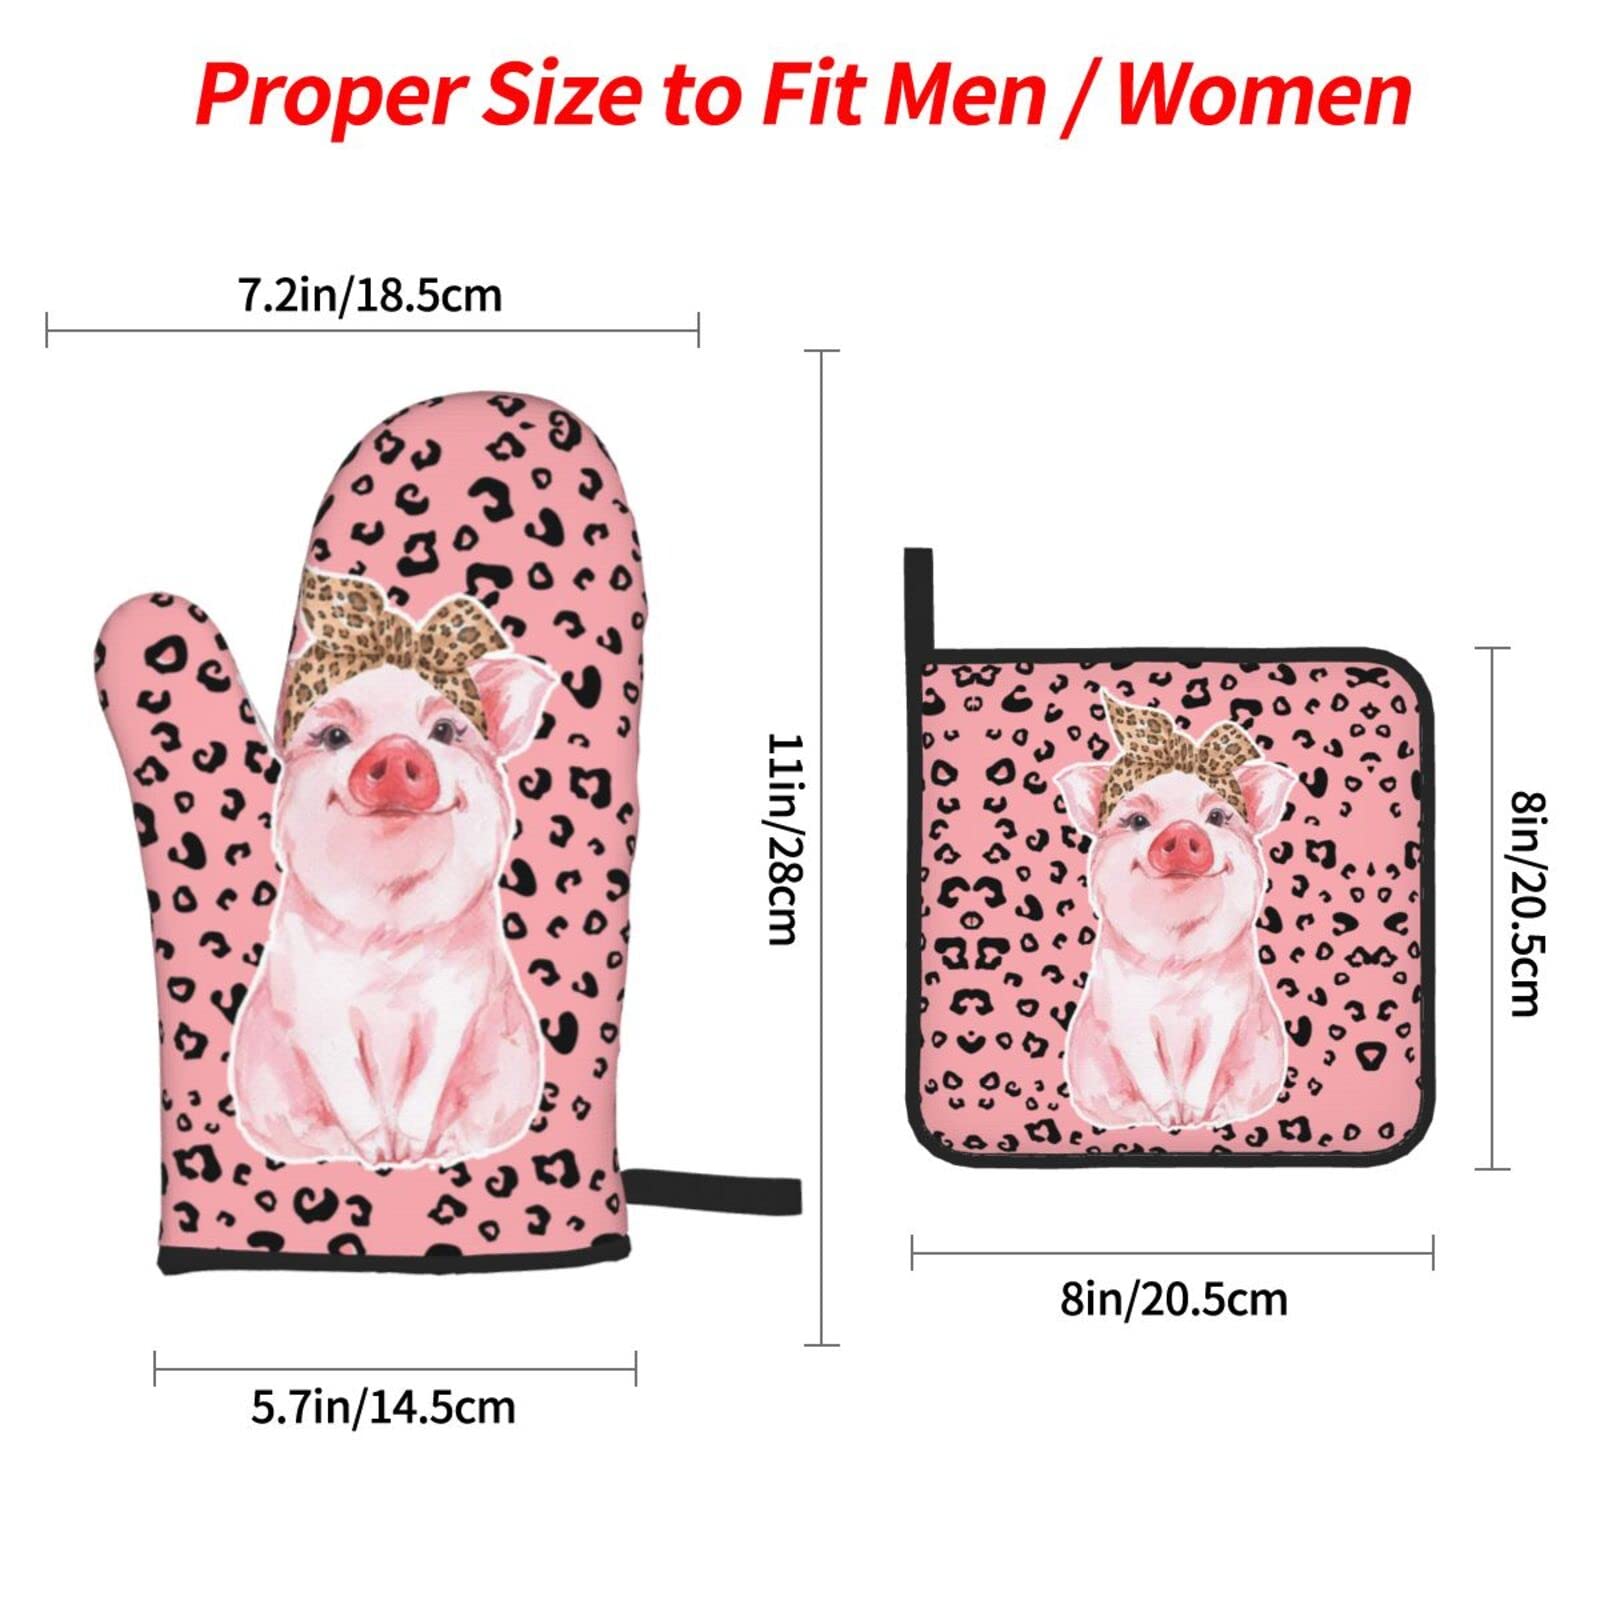 Pig Oven Mitts and Pot Holders Set of 4 Washable Heat Resistant Kitchen Gloves Waterproof Oven Gloves and Hot Pads for Cooking Grilling BBQ Baking